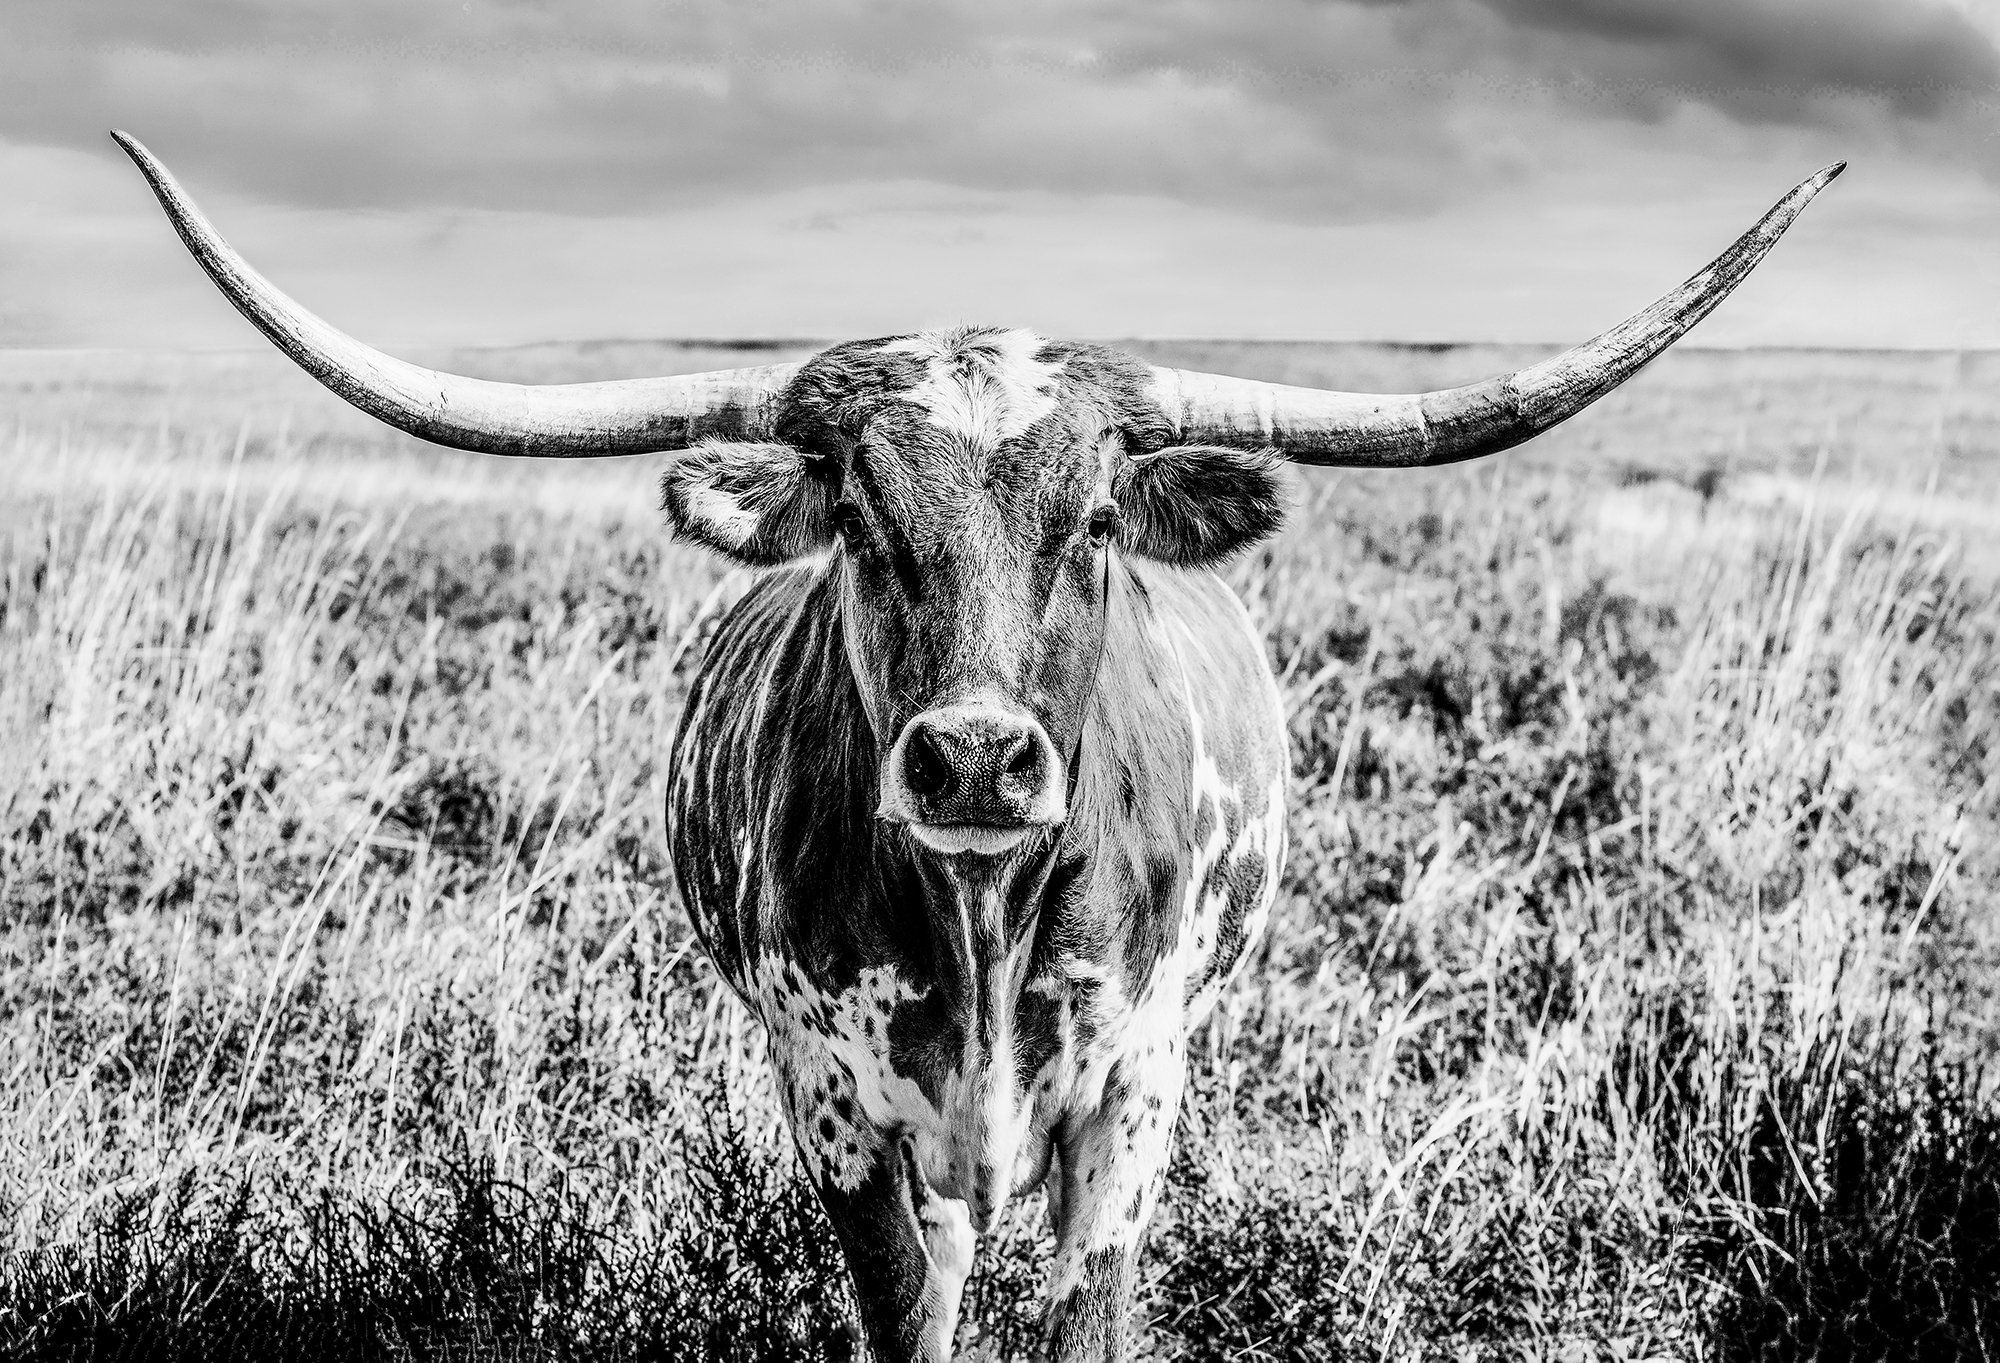 A longhorn cow with big horns in a field - Longhorn